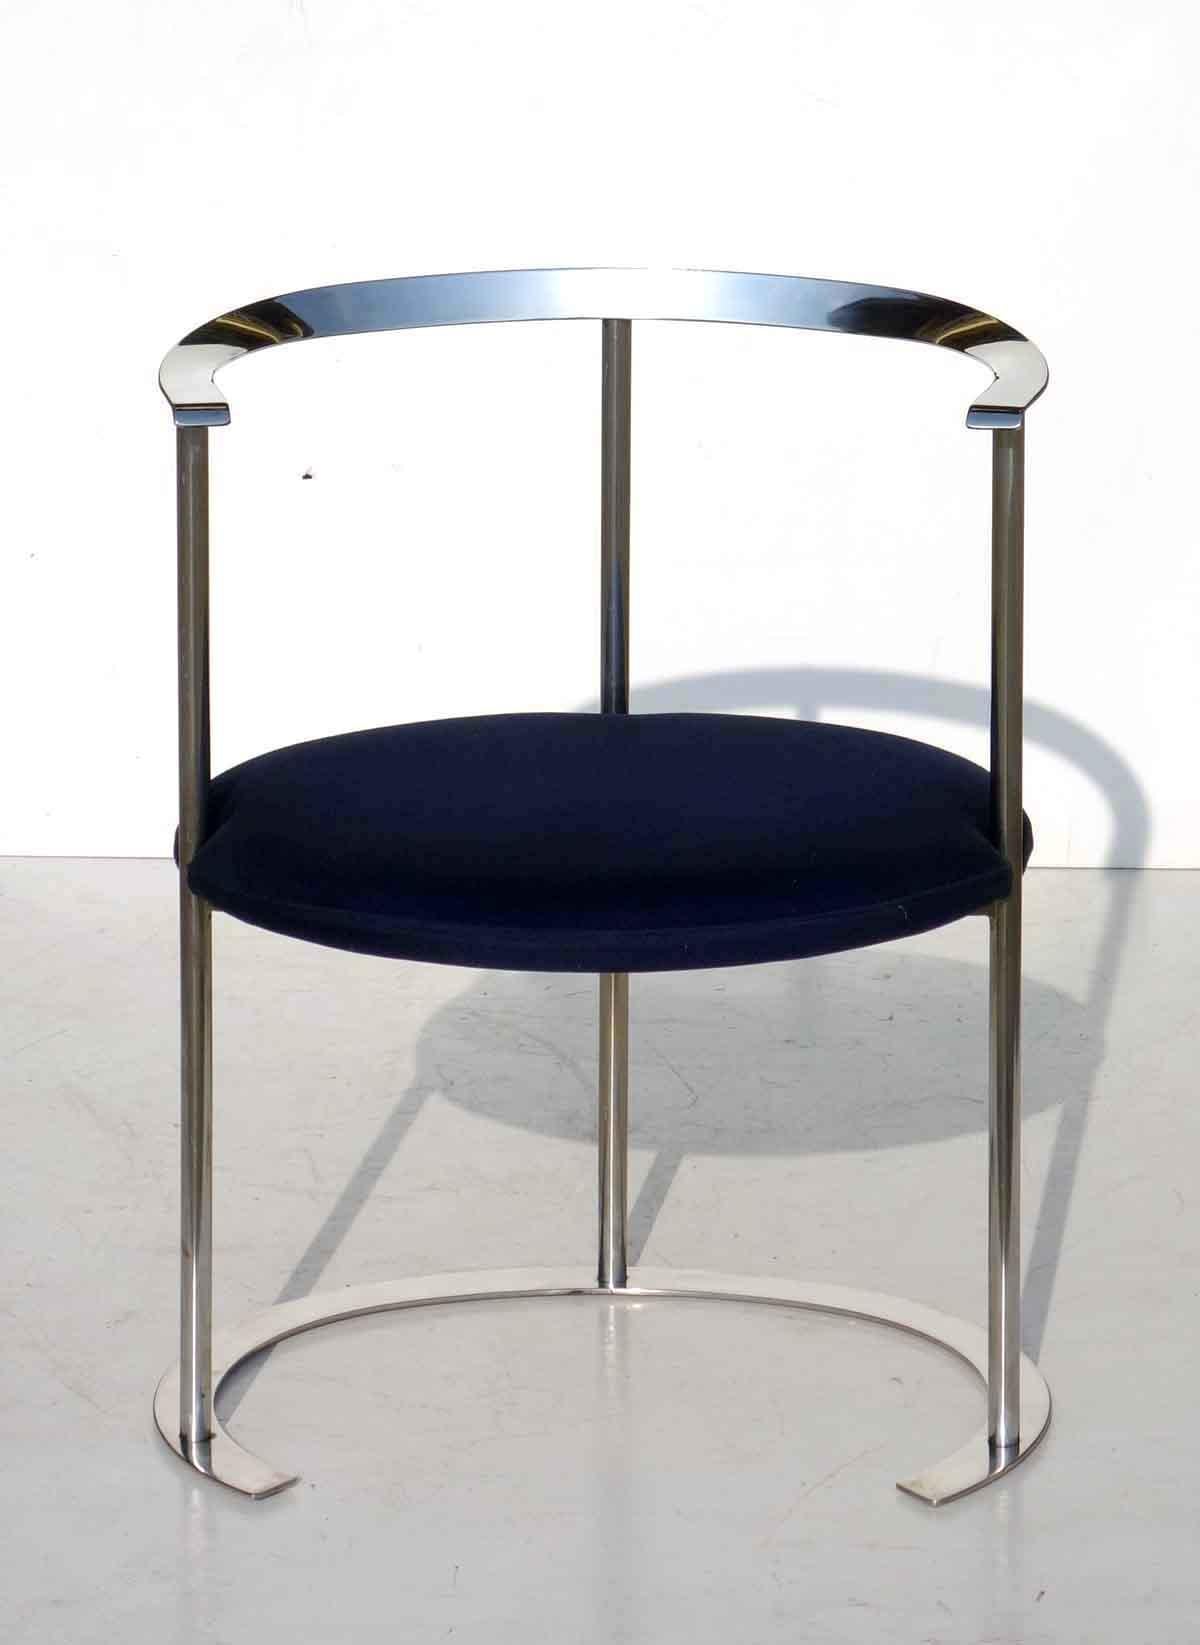 Luigi Caccia Dominioni Catilina chairs for Azucena, Italy, 1958
Metal steel frame
Original fabric seat
Frame and upholstery in excellent condition.
  